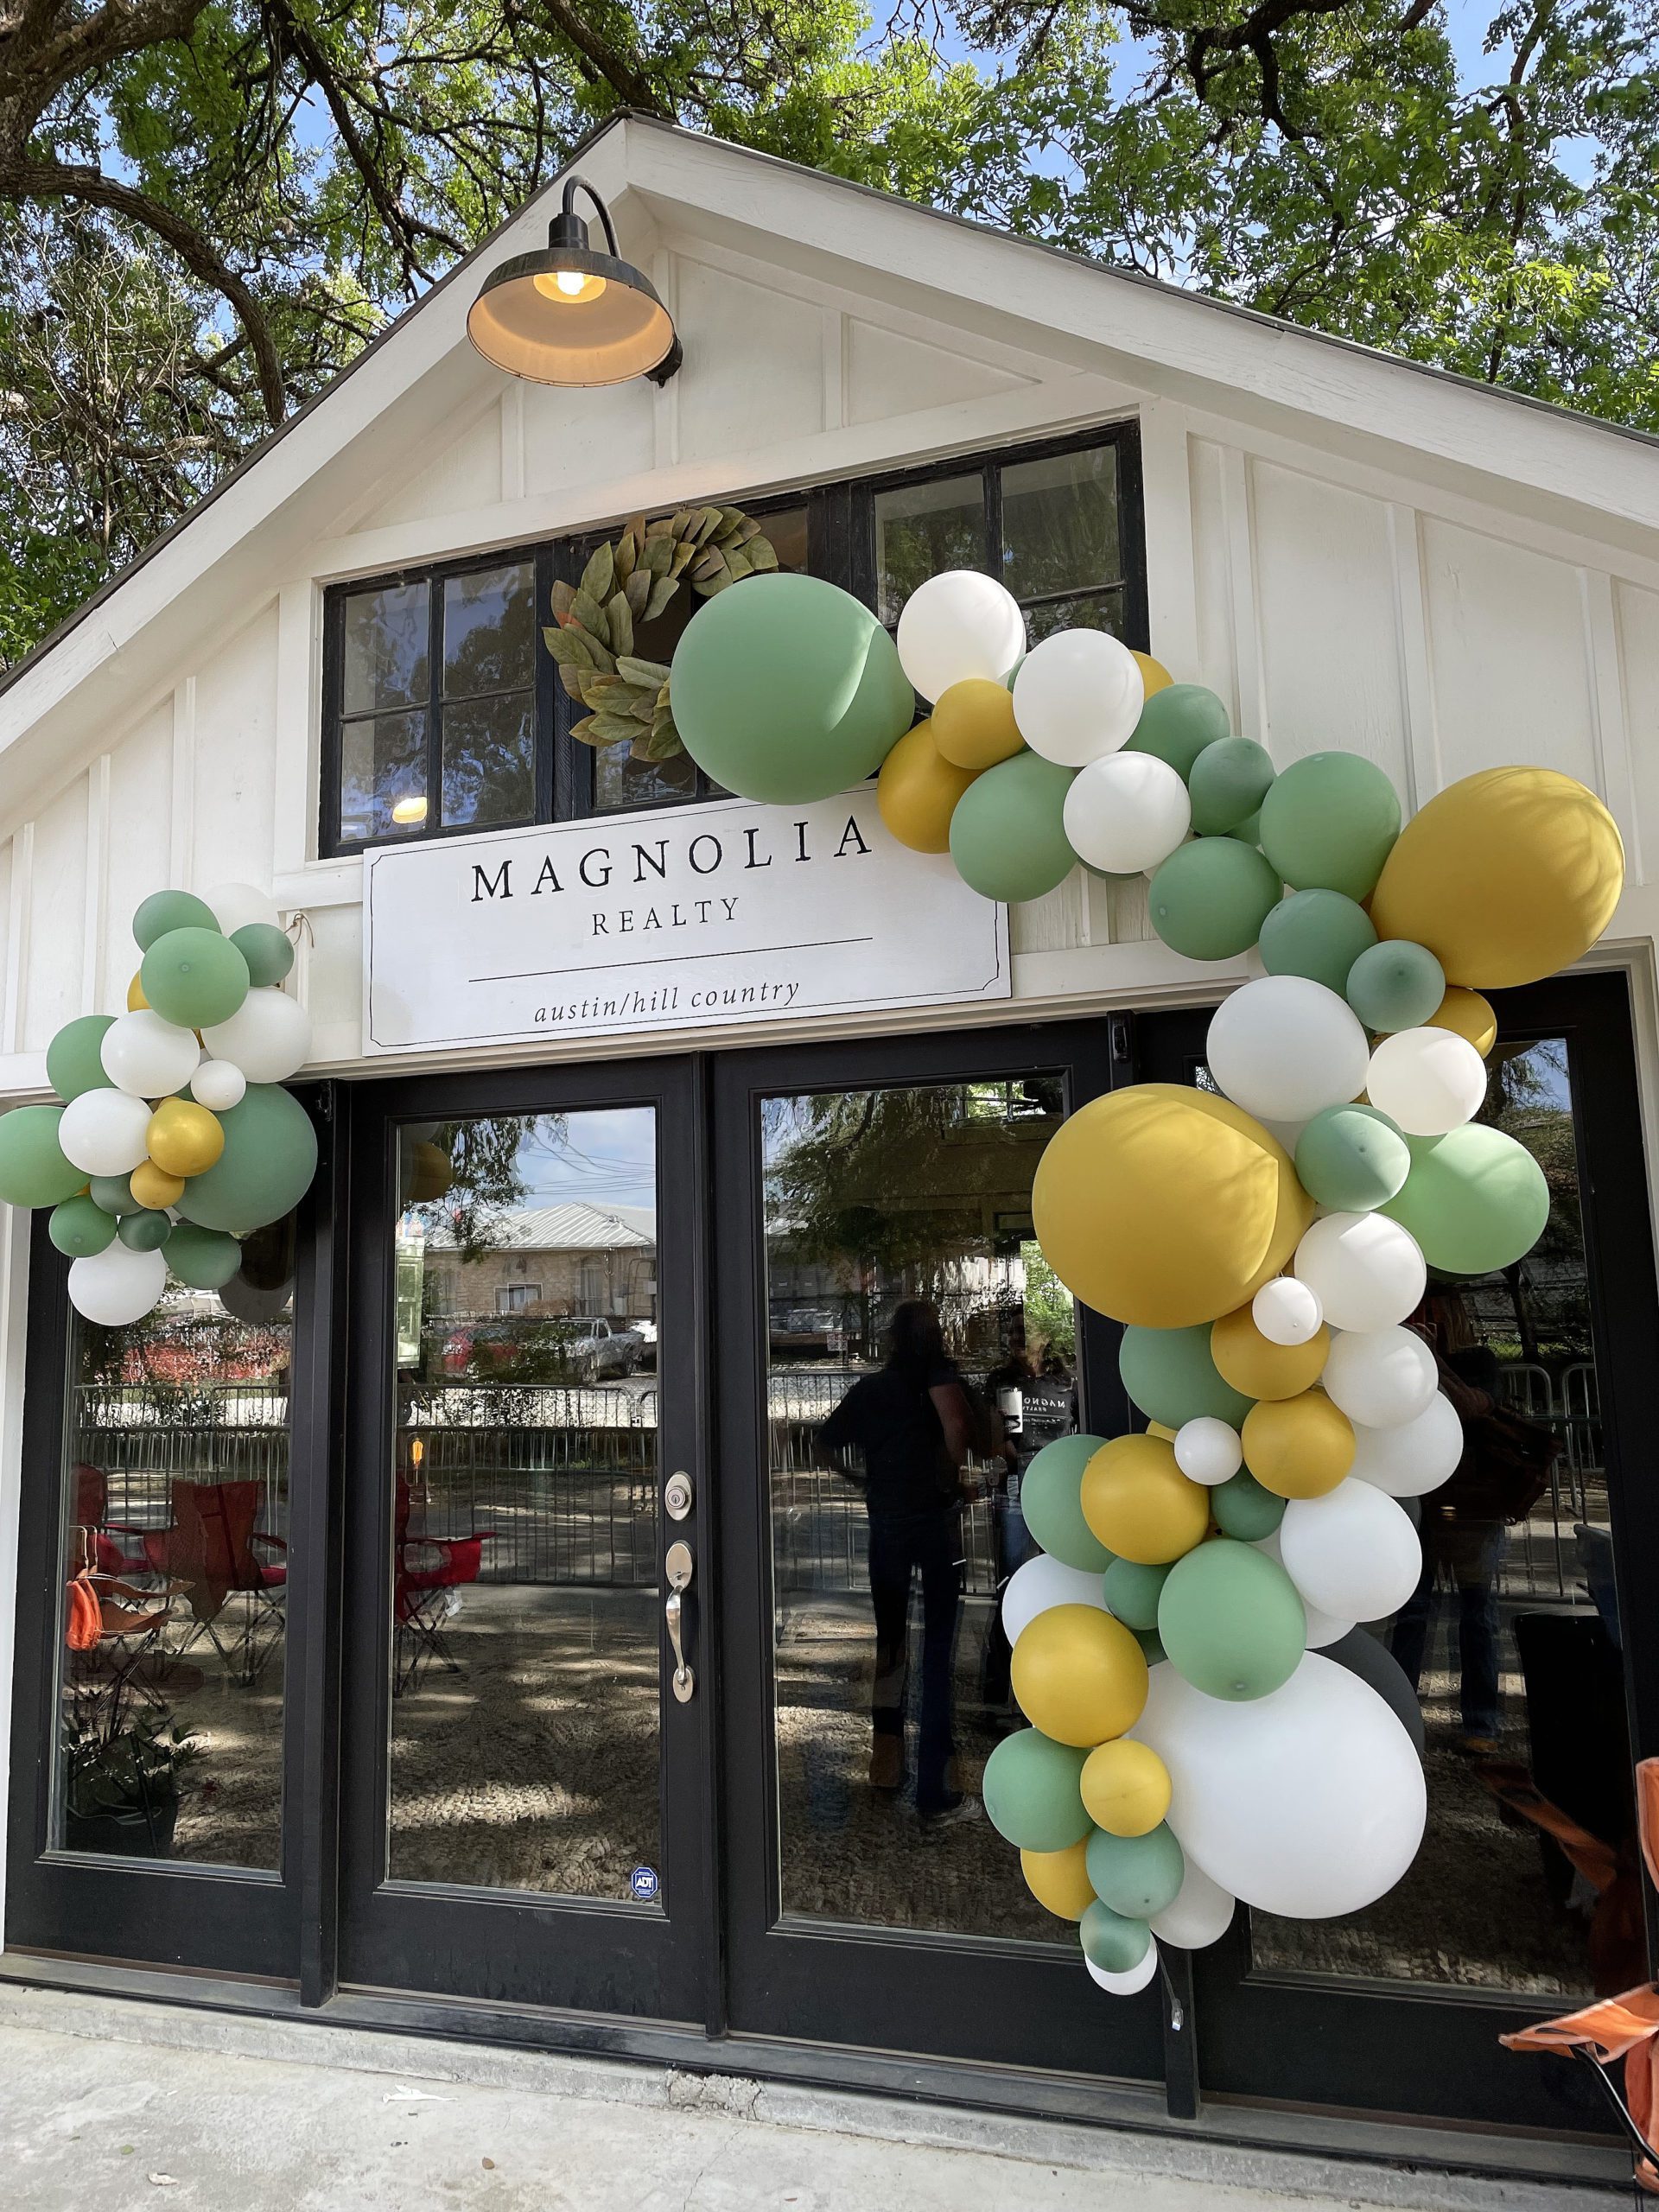 Magnolia Realty Austin Hill Country office at Founders Day in Dripping Springs